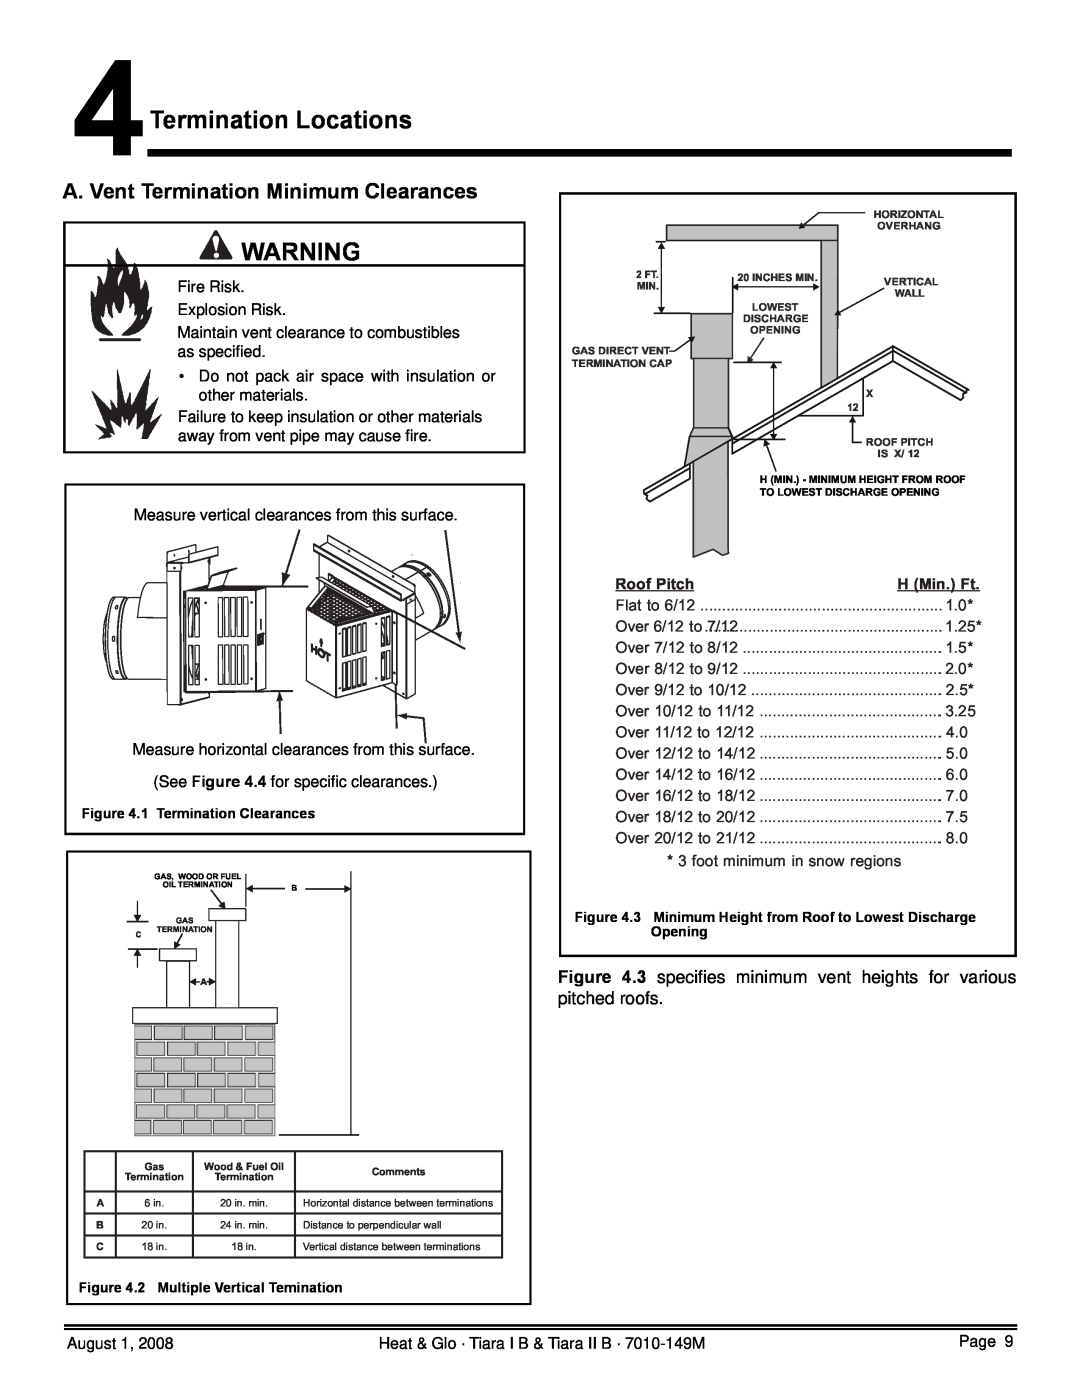 Hearth and Home Technologies TIARA I-B 4Termination Locations, A. Vent Termination Minimum Clearances, Roof Pitch, 3.25 